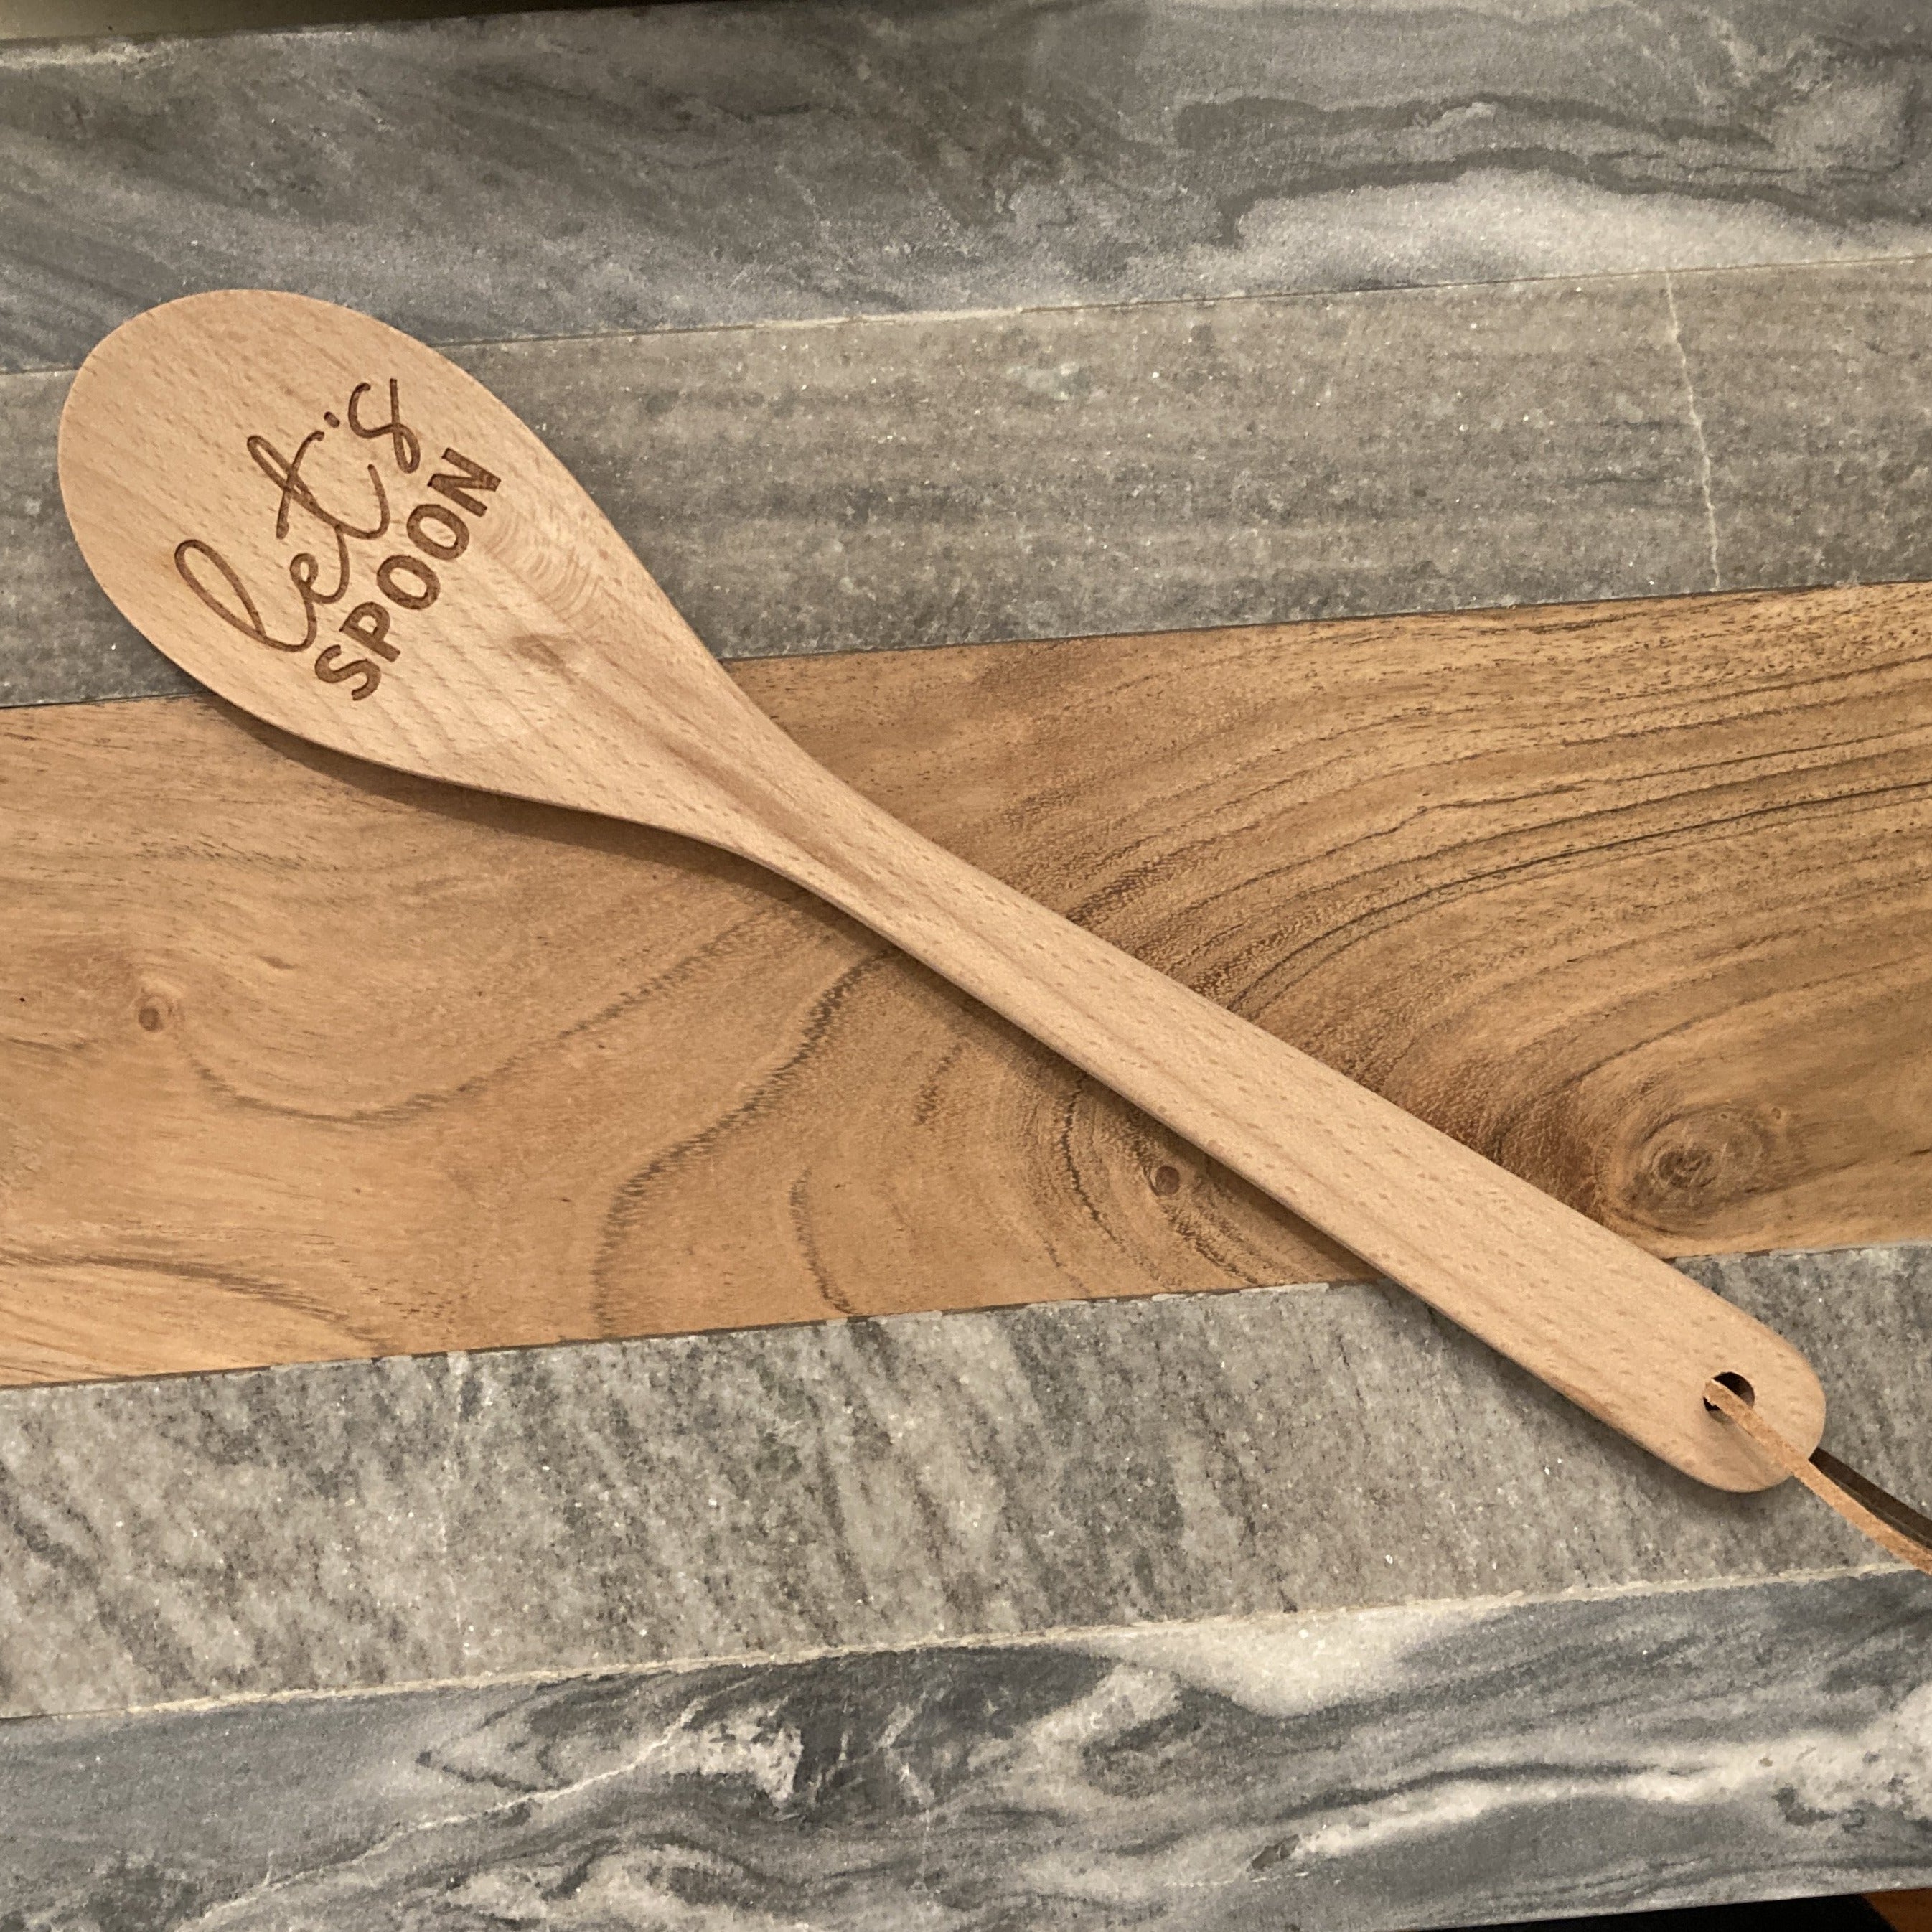 Wooden Spoon - says Let's Spoon